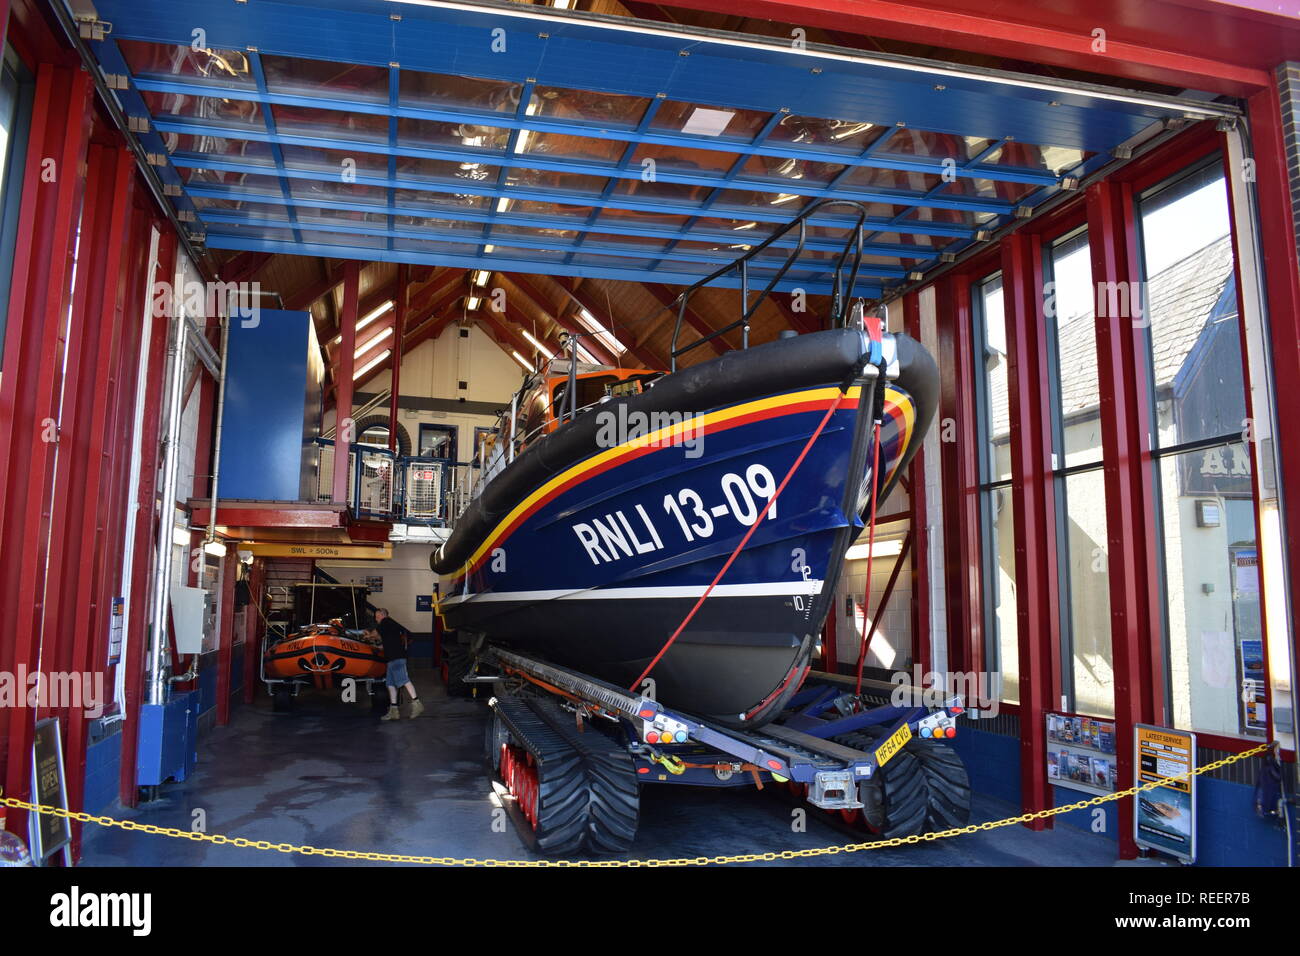 Wonderful, bright image of the 'RNLI 13-09'. A lifeboat at the ilfracombe Harbour, Devon. This was taken by Tim Bailey in the summer of 2018. Stock Photo